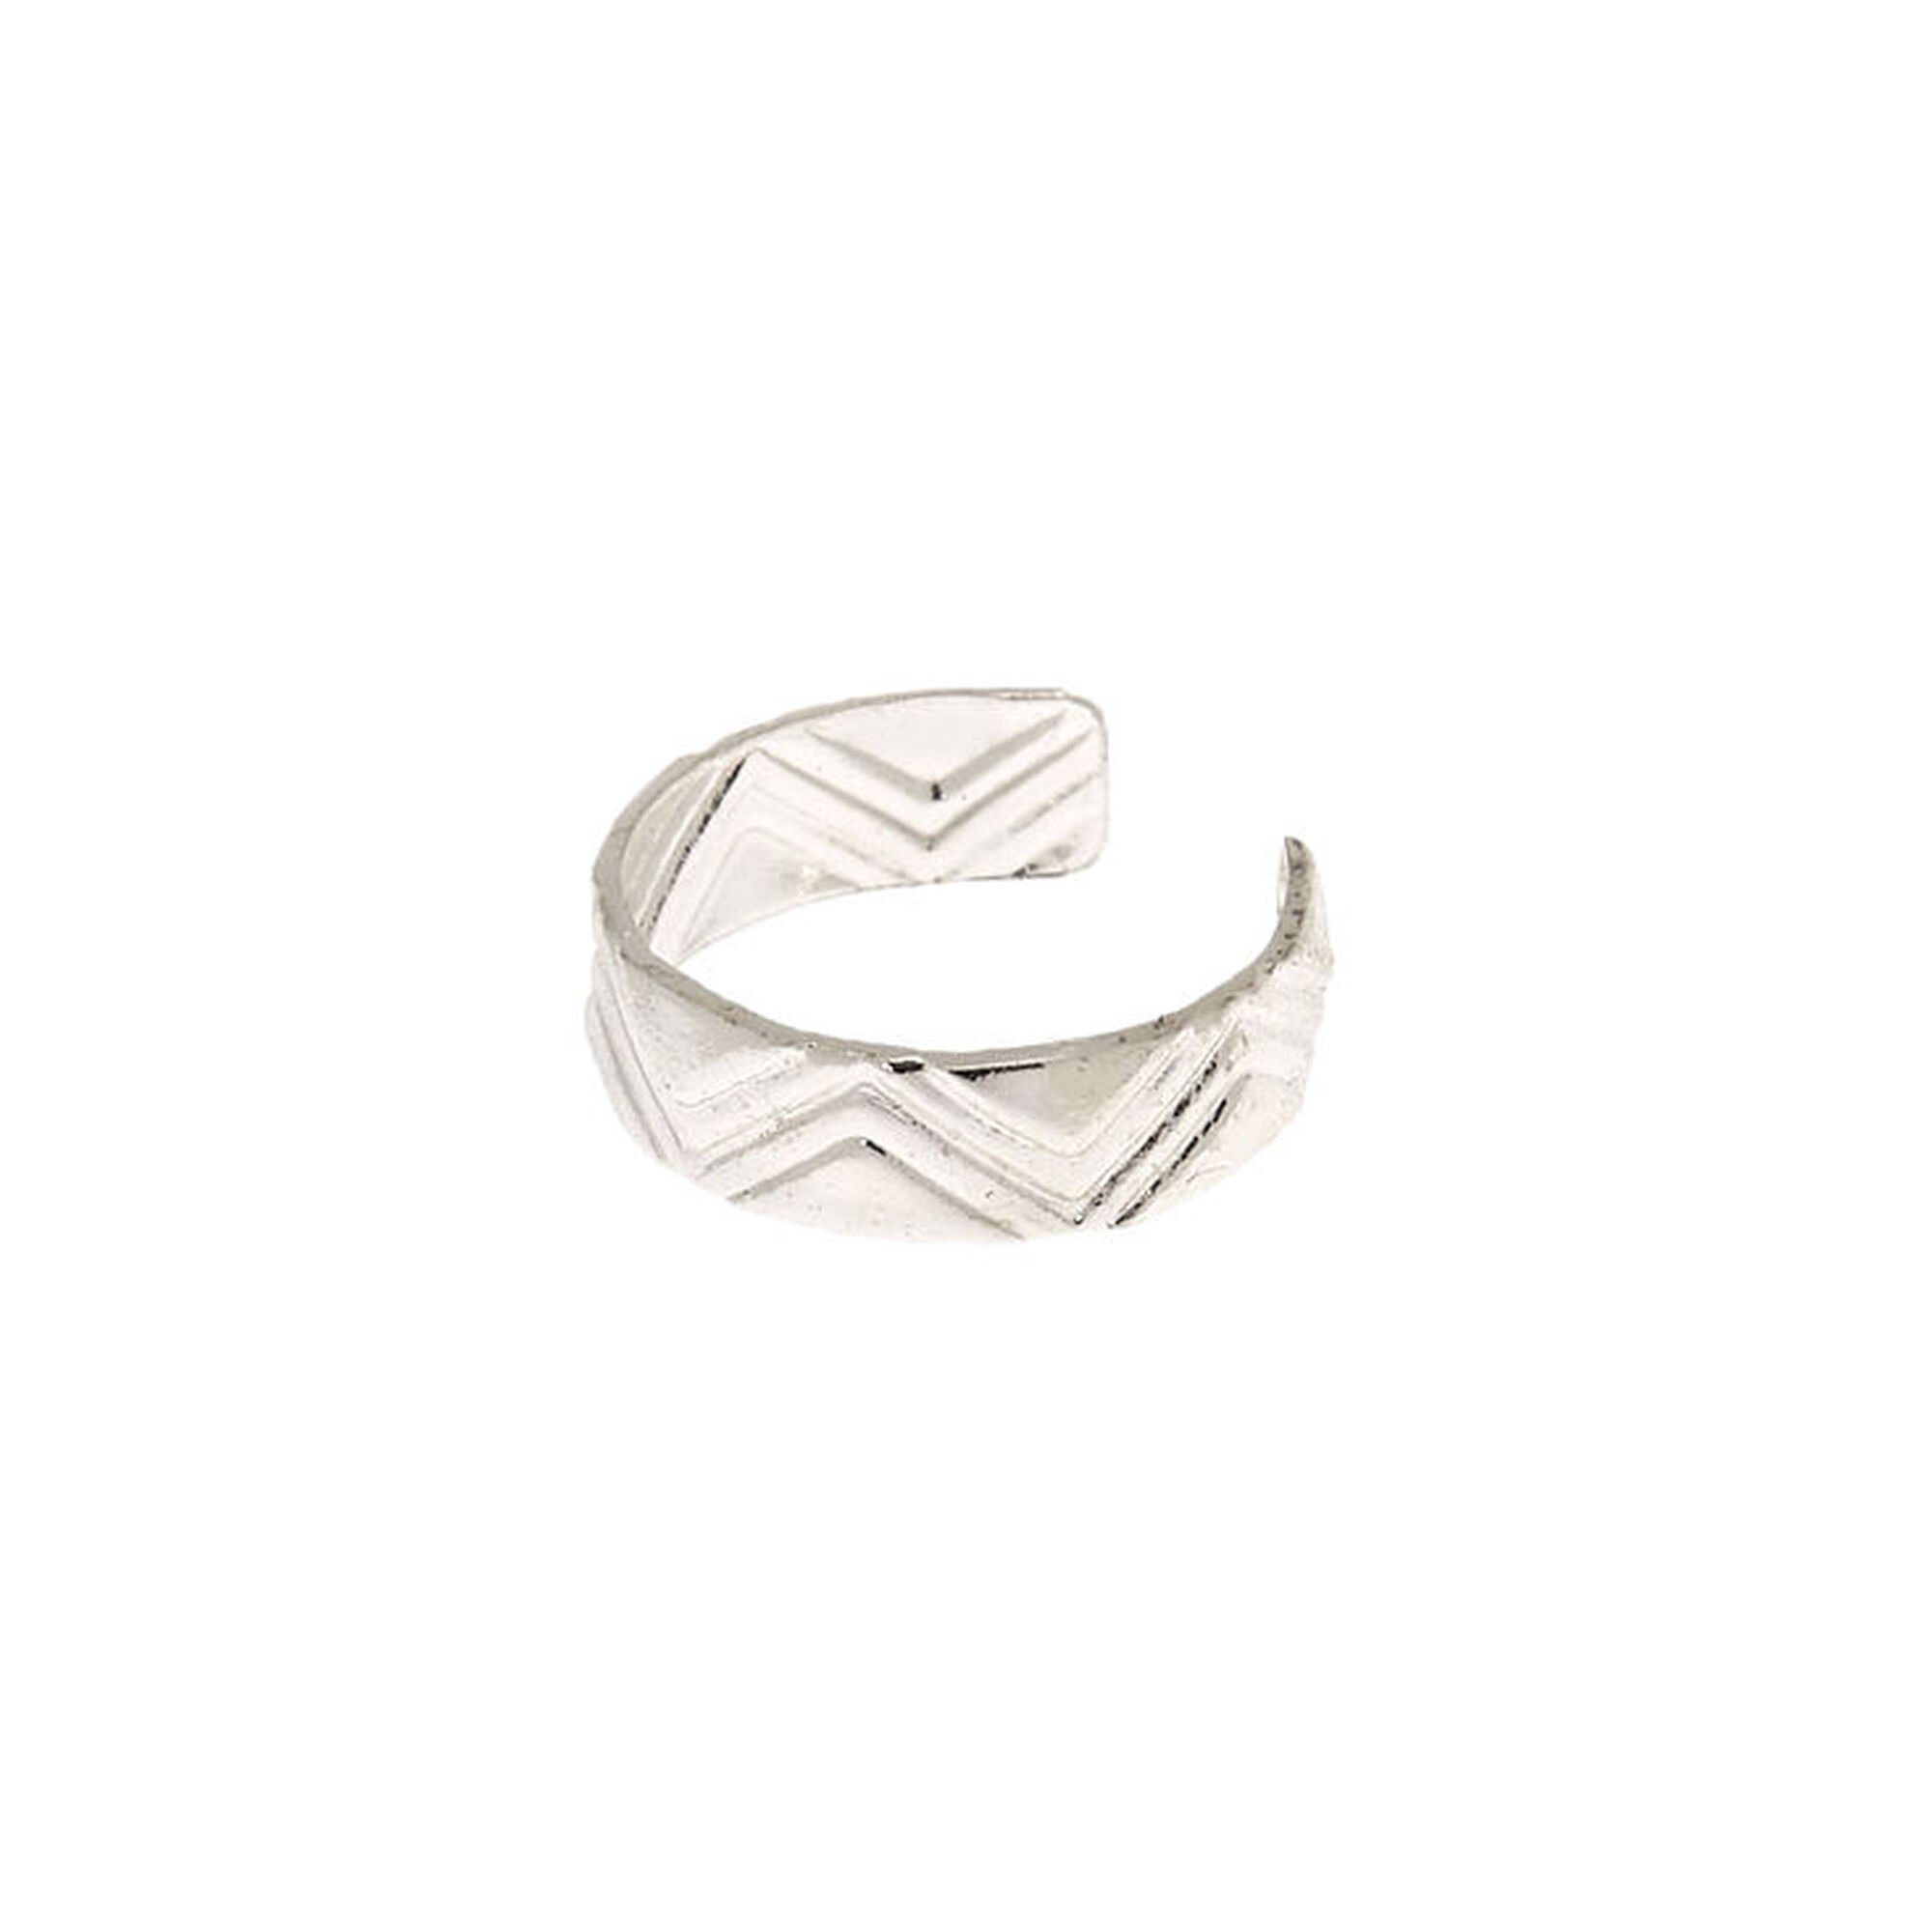 View Claires Tone Zig Zag Print Ear Cuff Silver information